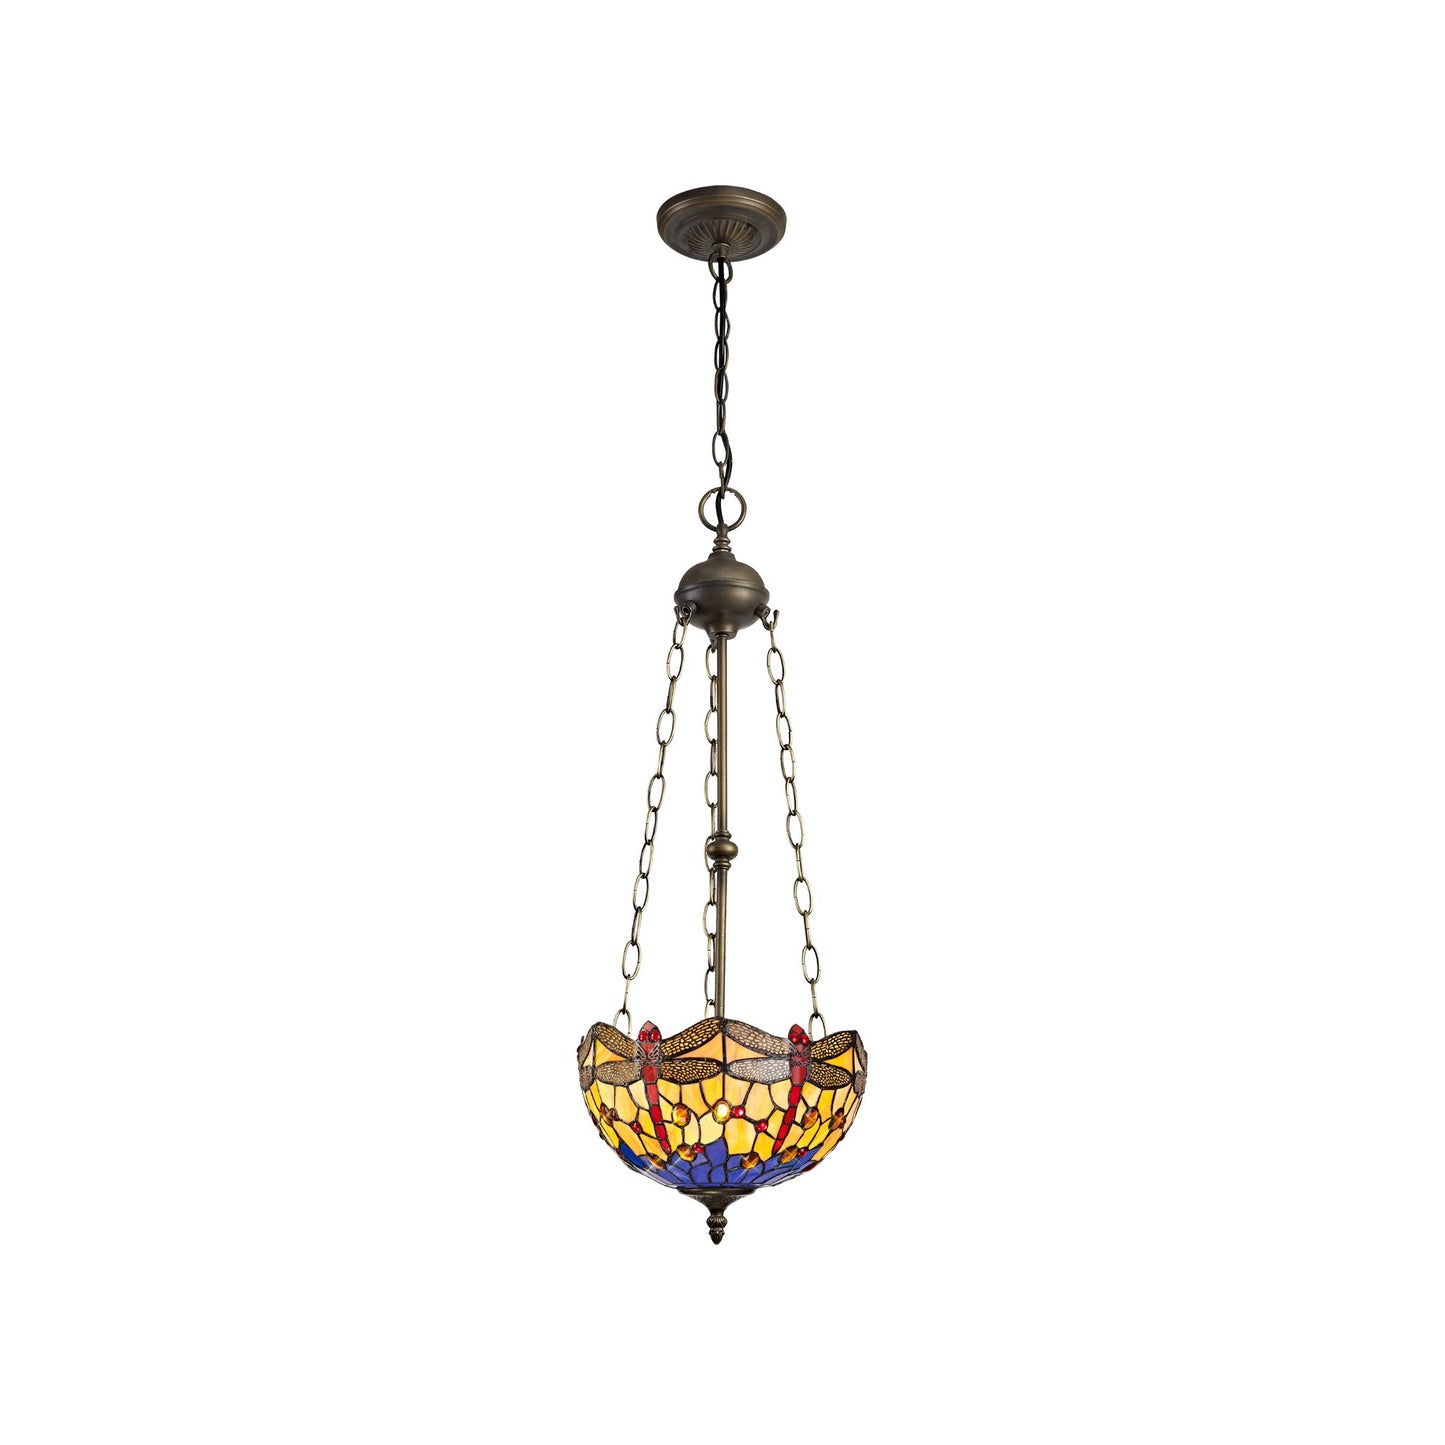 Blue and Yellow Summer Chandelier Style Uplighter Pendant